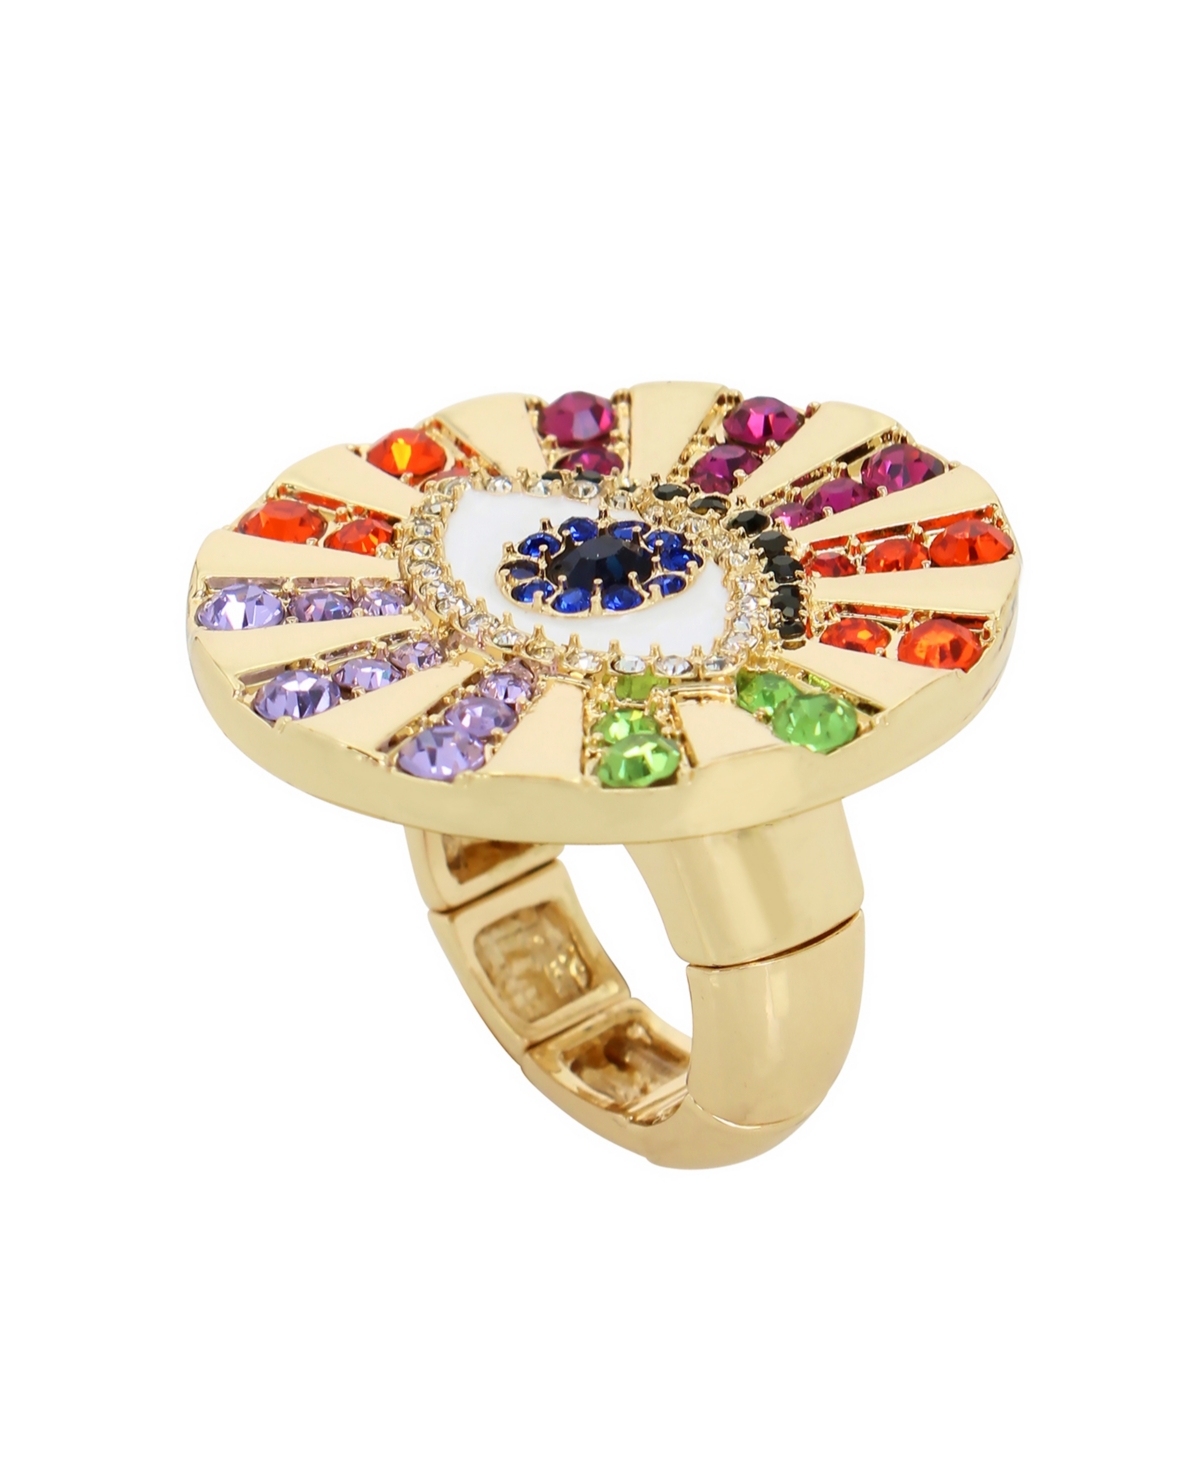 Faux Stone Evil Eye Cocktail Ring - Multi, Gold